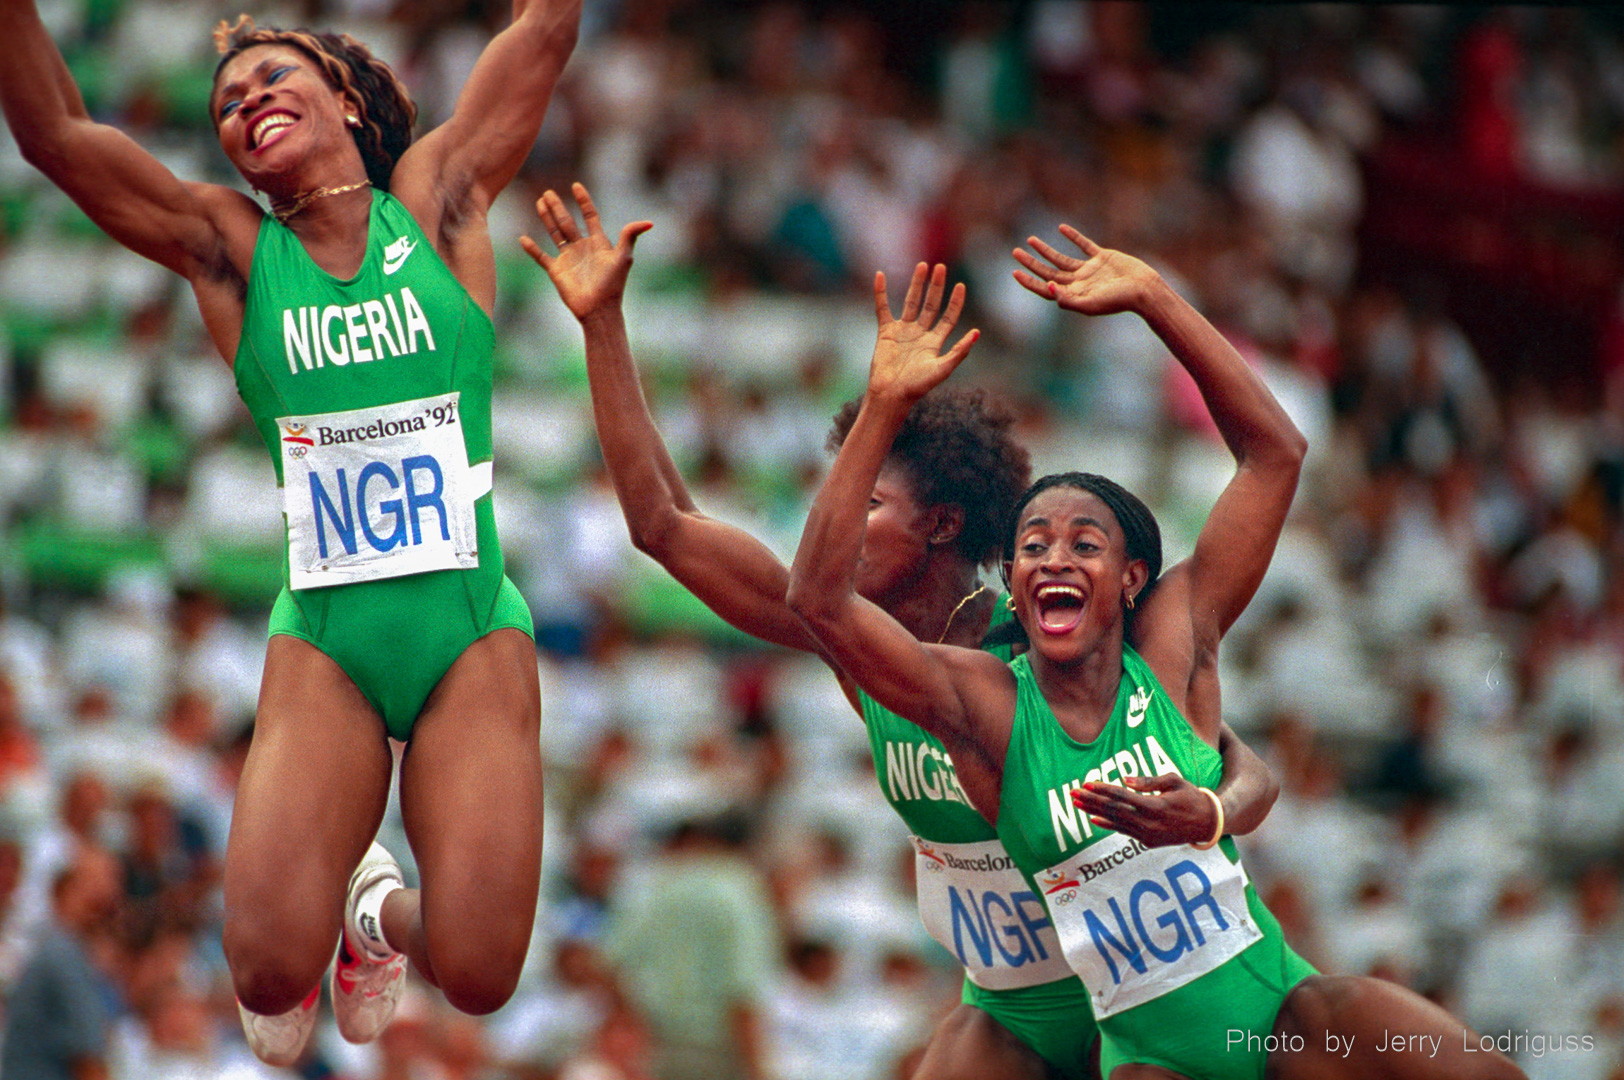 Nigeria's 4 x 100 meter women's relay team can't believe their luck in capturing an unexpected bronze medal in the 1992 Olympics in Barcelona, Spain.